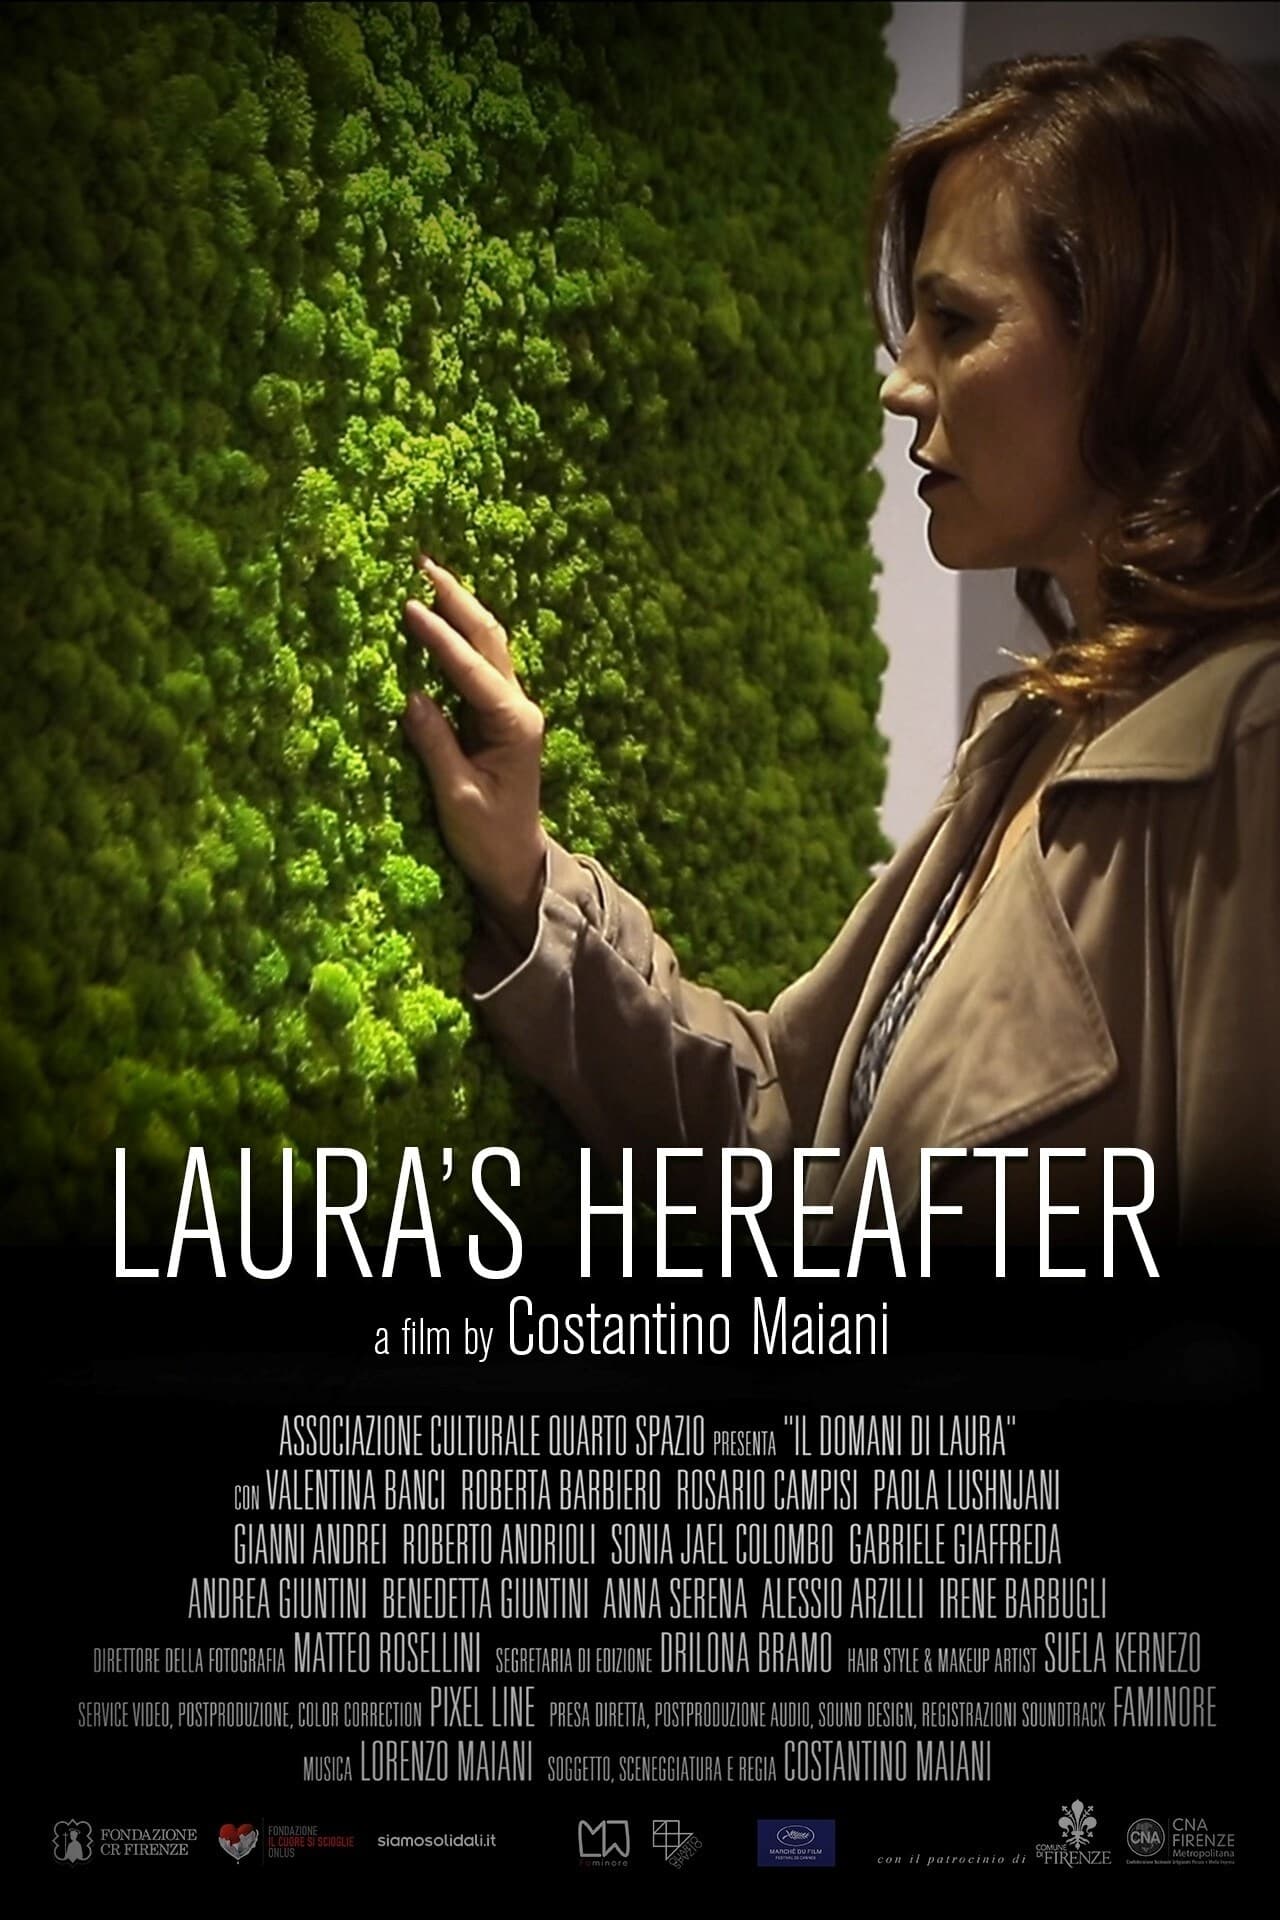 Laura's Hereafter